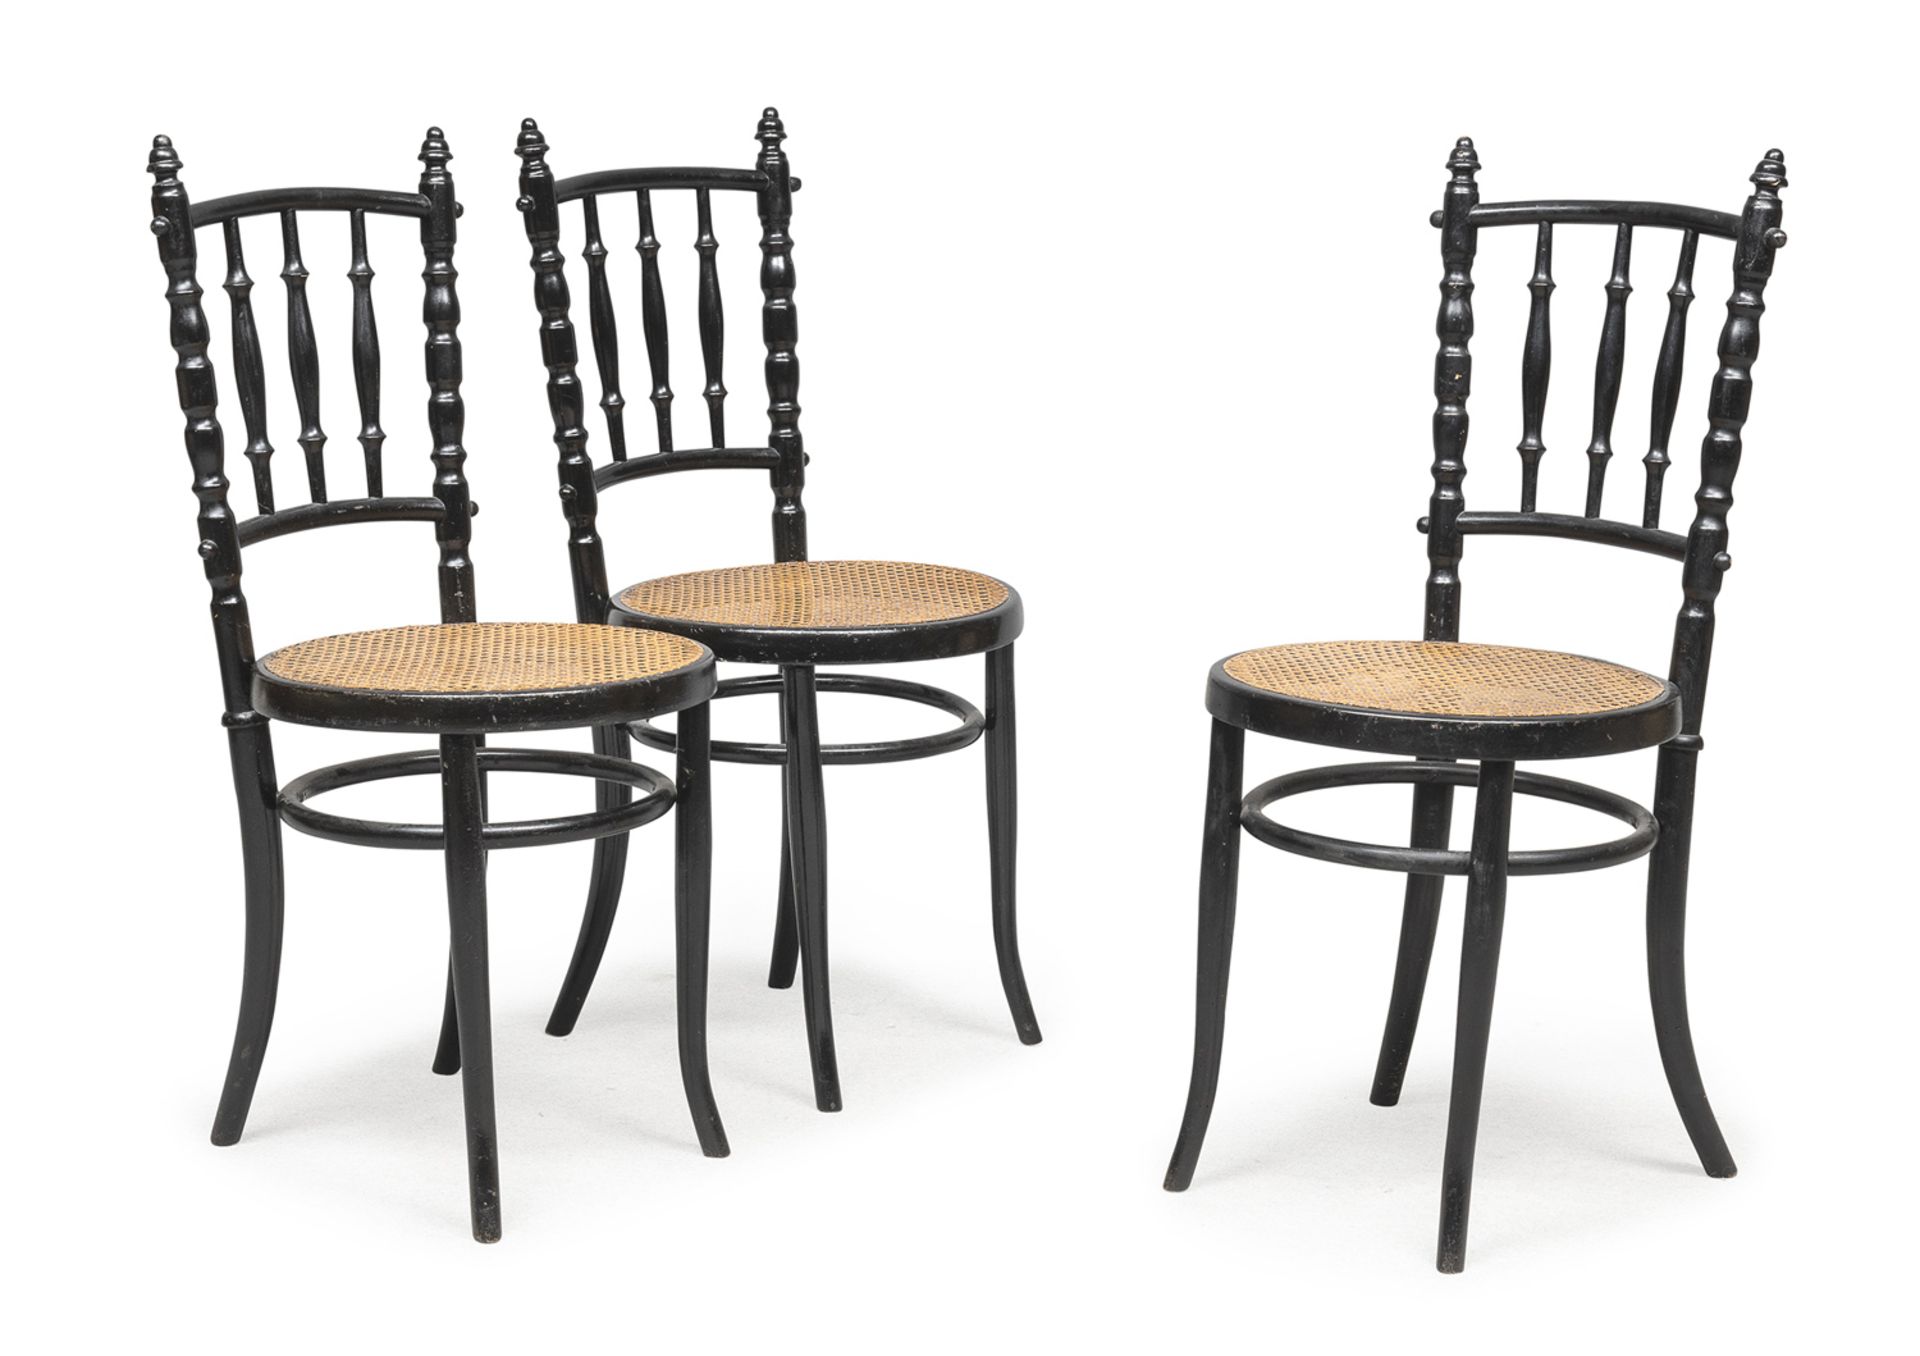 THREE EBONY WOOD CHAIRS PROBABLY FISHER EARLY 20TH CENTURY